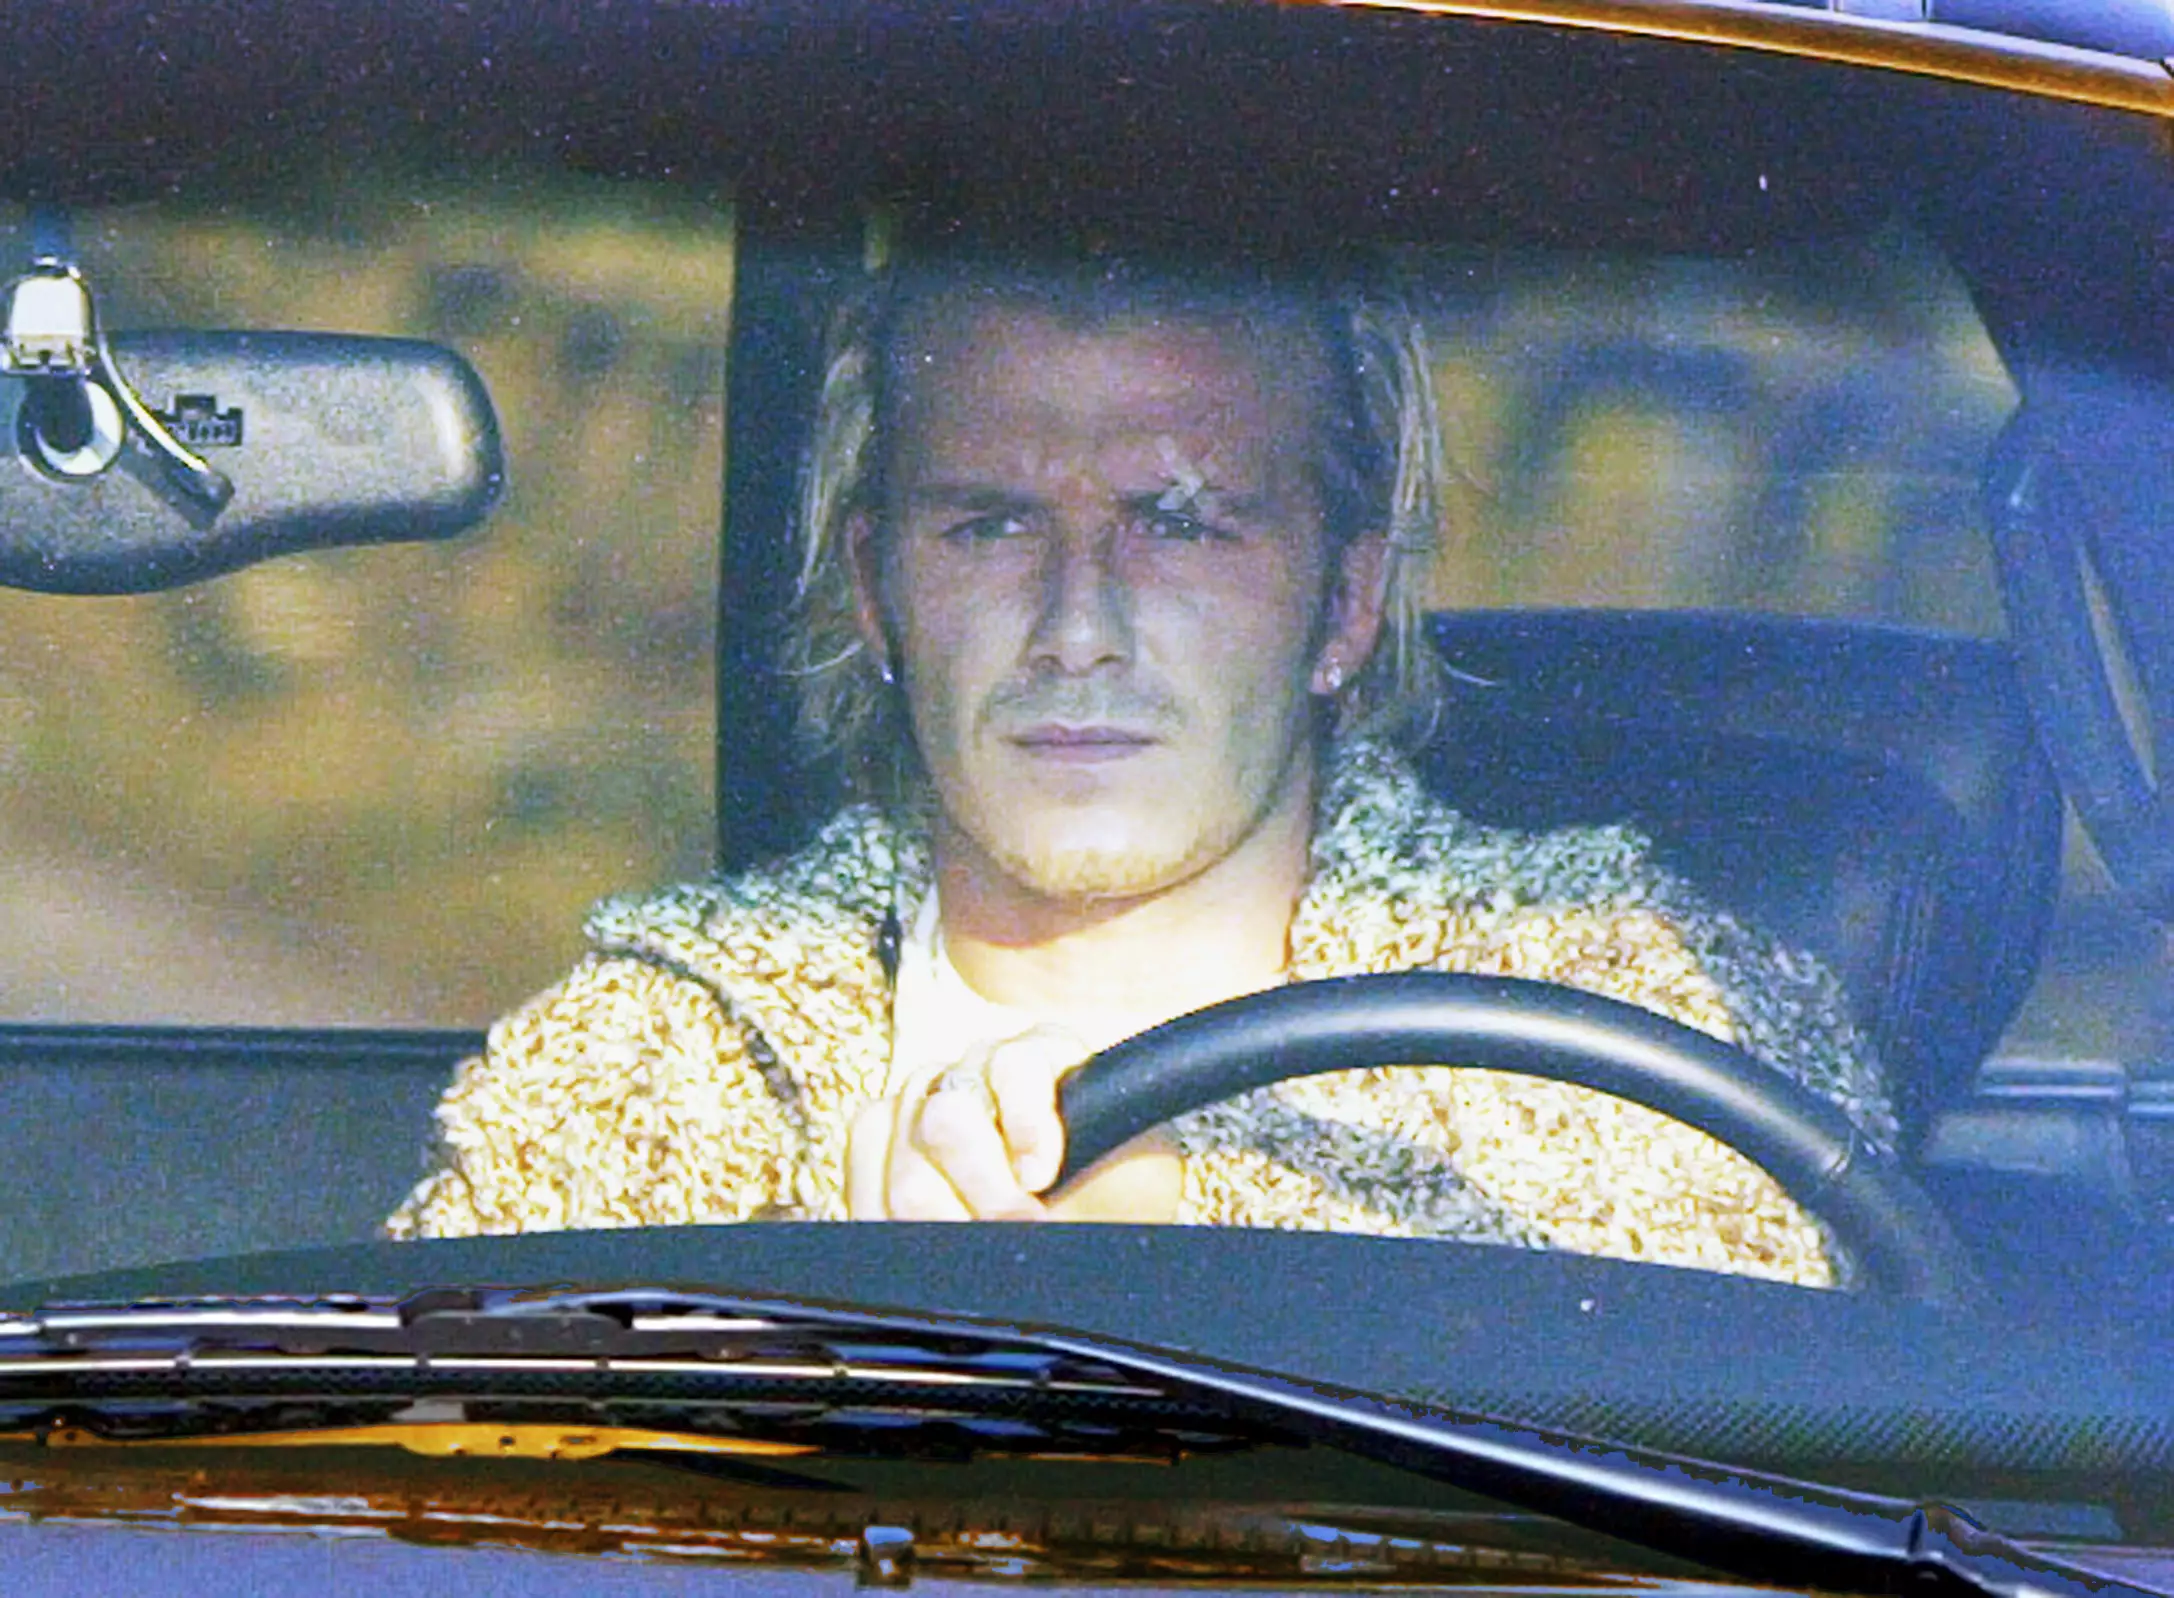 Beckham was papped with the stitches above his eye the next day. Image: PA Images